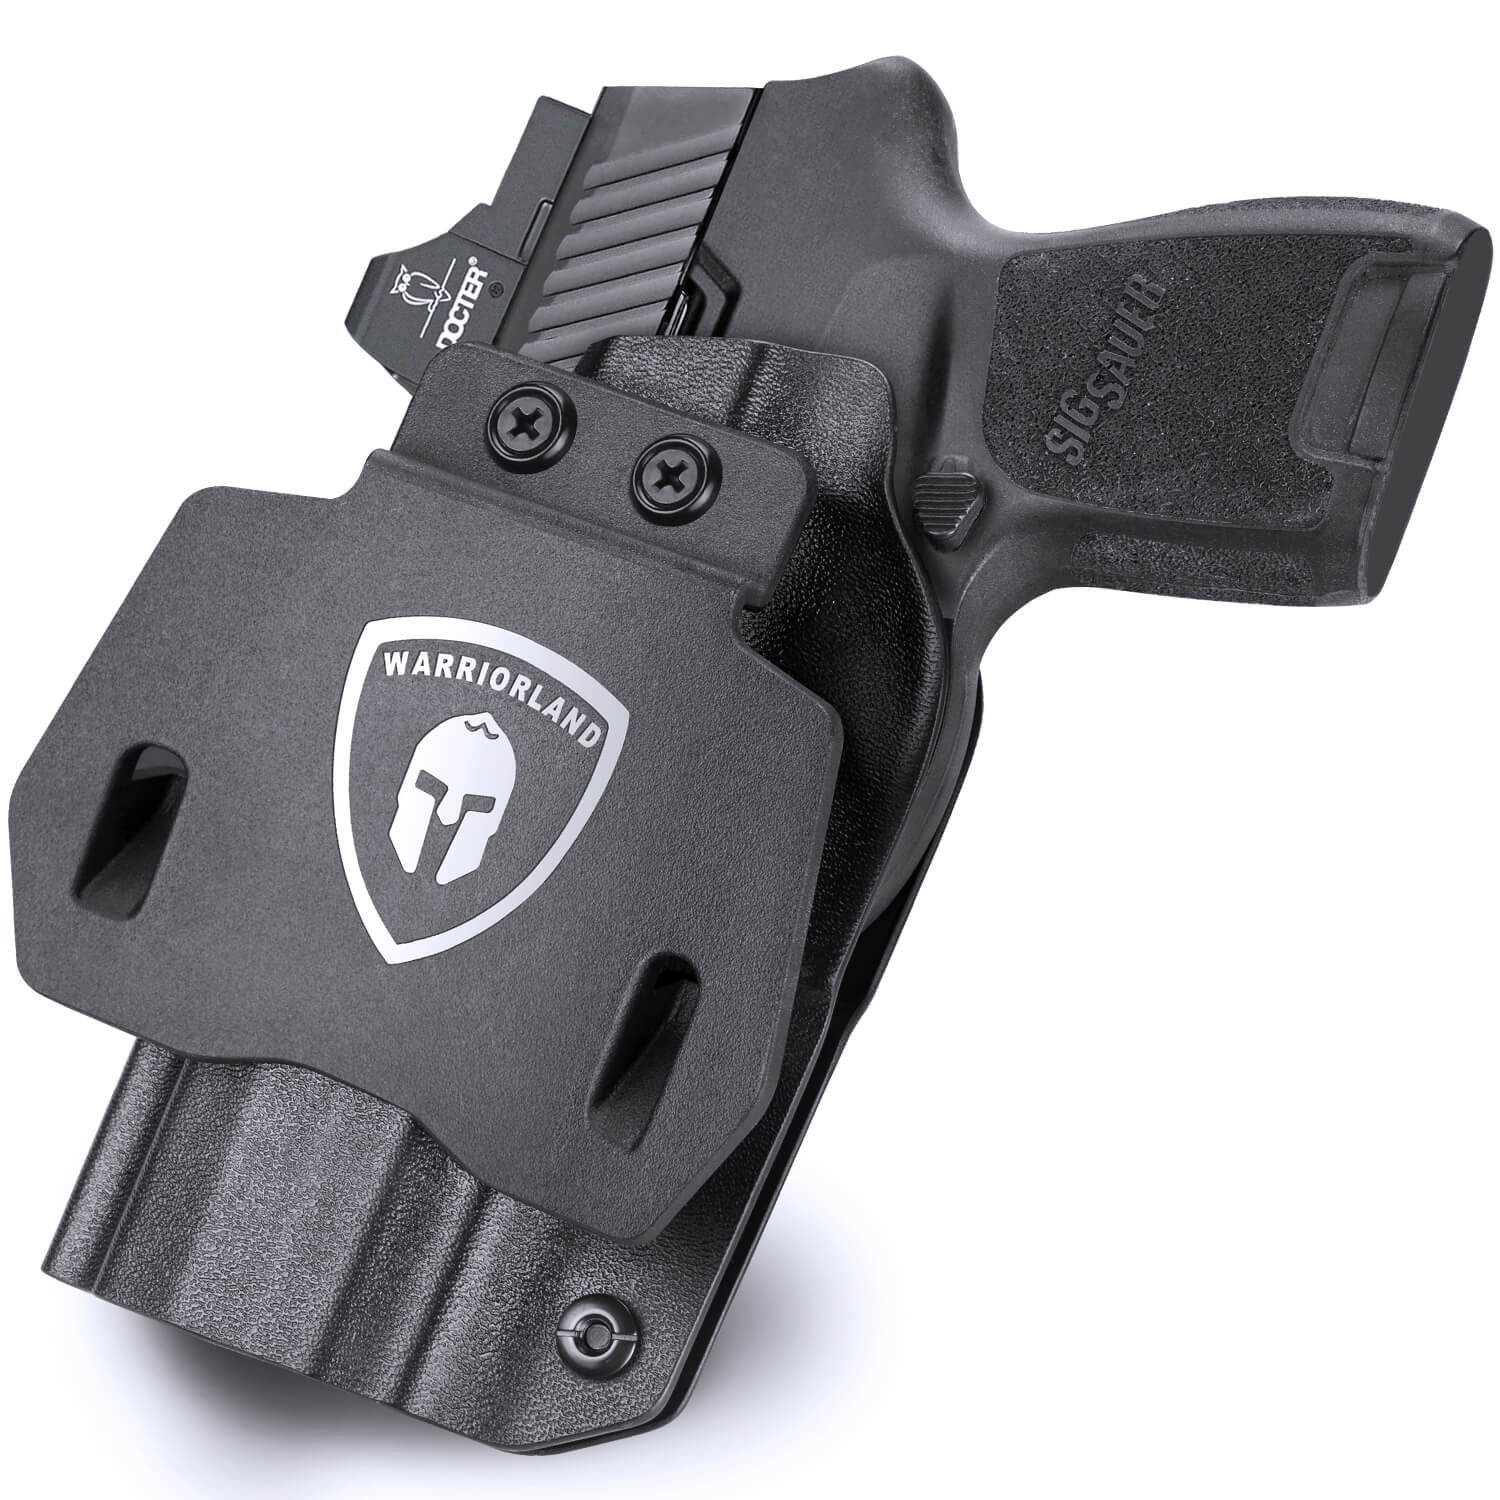 Sig Sauer P320 Full Size Compact P320X Carry Pistol OWB KYDEX Paddle Holster Appendix Open Carry Red Dot Optics Cut Fully Trigger Guard | WARRIORLAND